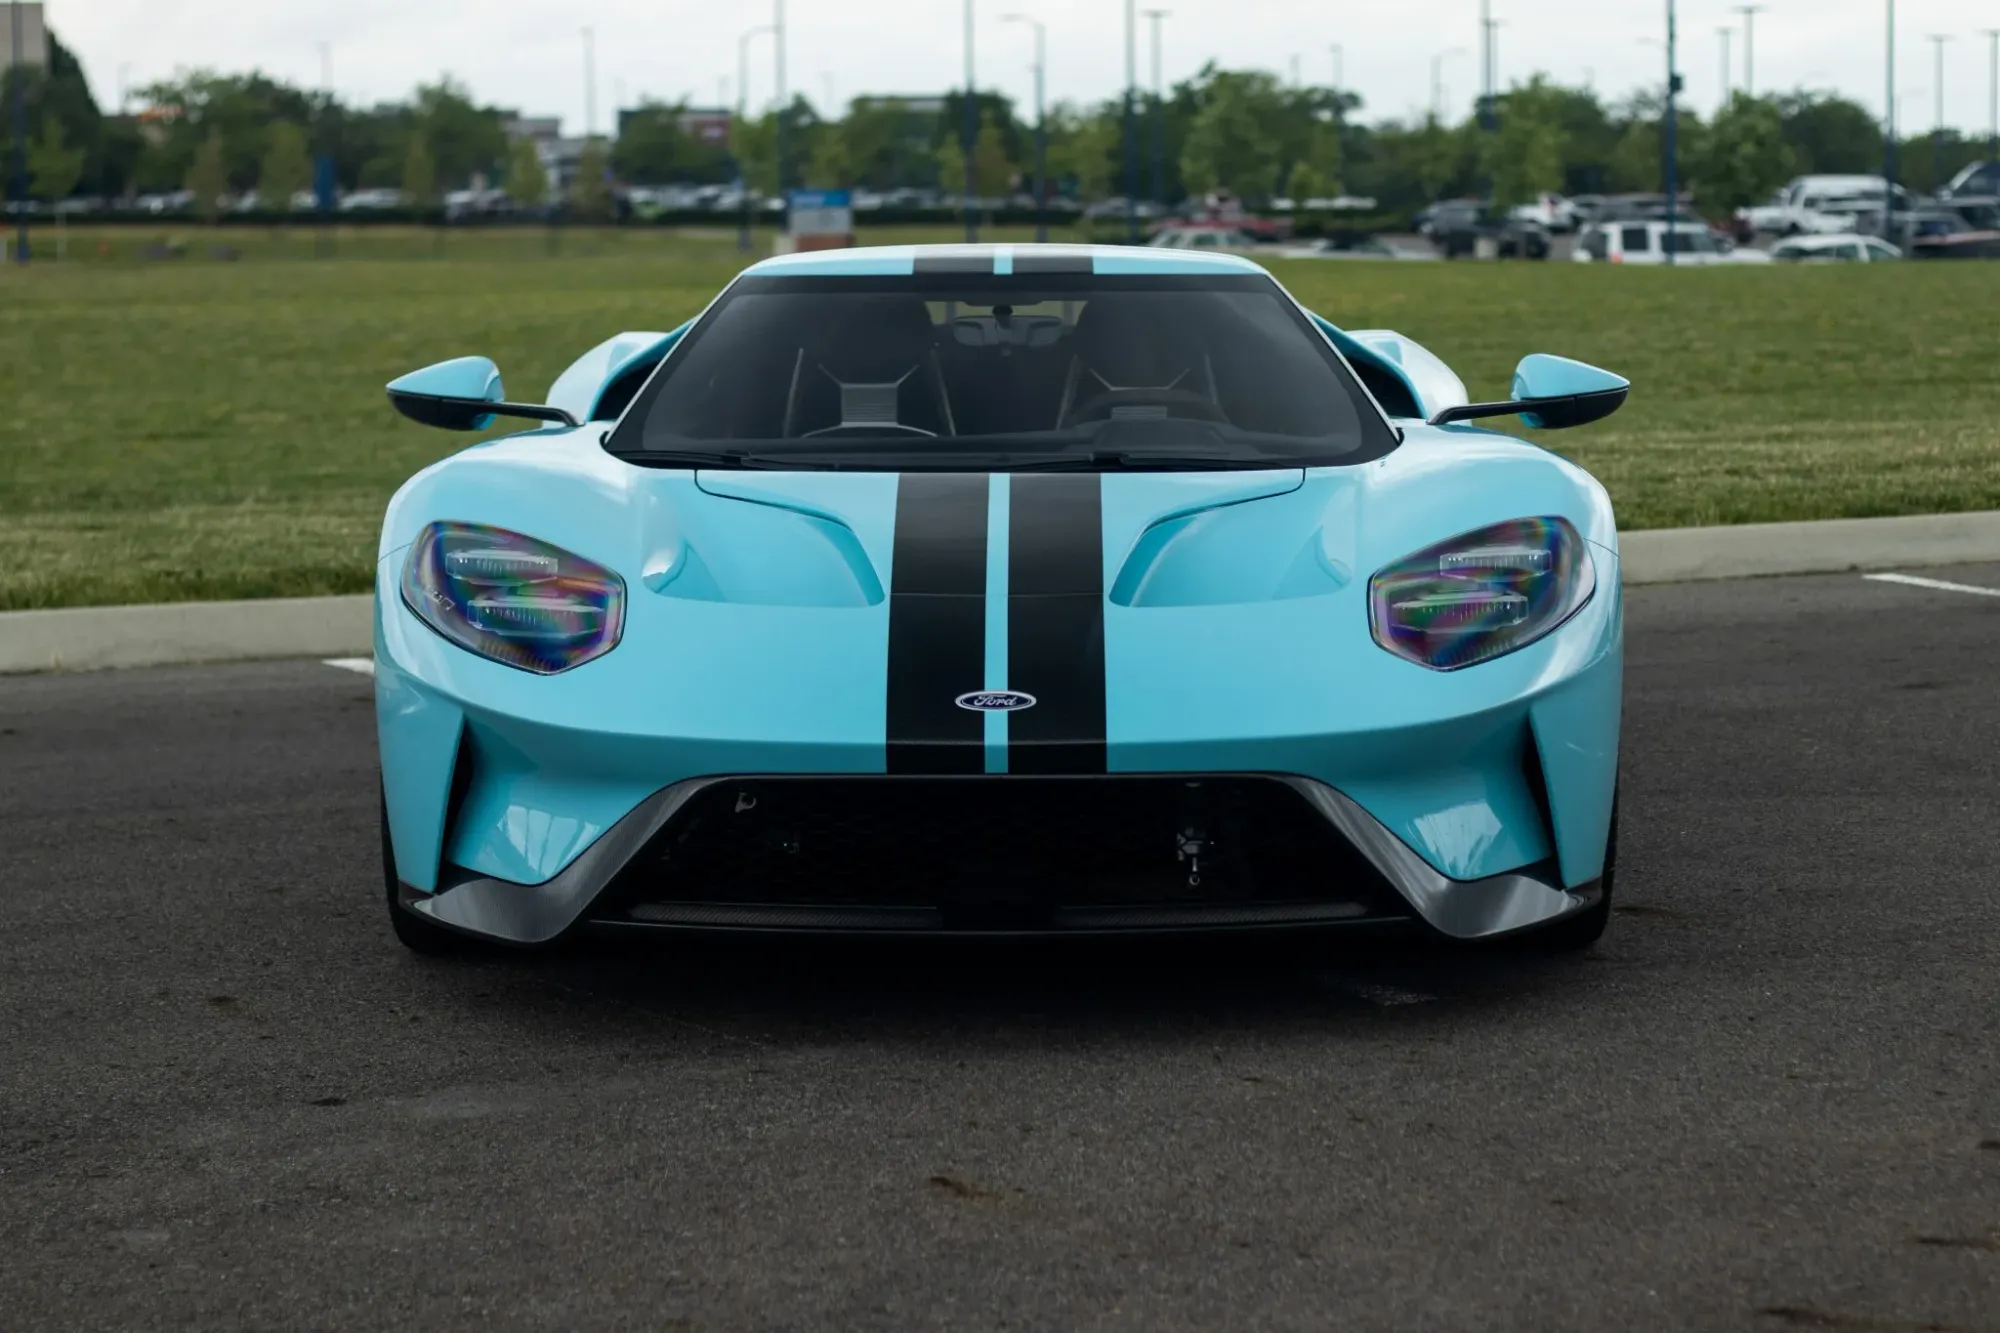 handpicked, sports, american, news, newsletter, highlights, muscle, client, classic, modern classic, europe, features, luxury, trucks, celebrity, off-road, german, italian, cascio motors is selling a 2019 ford gt carbon series at no reserve